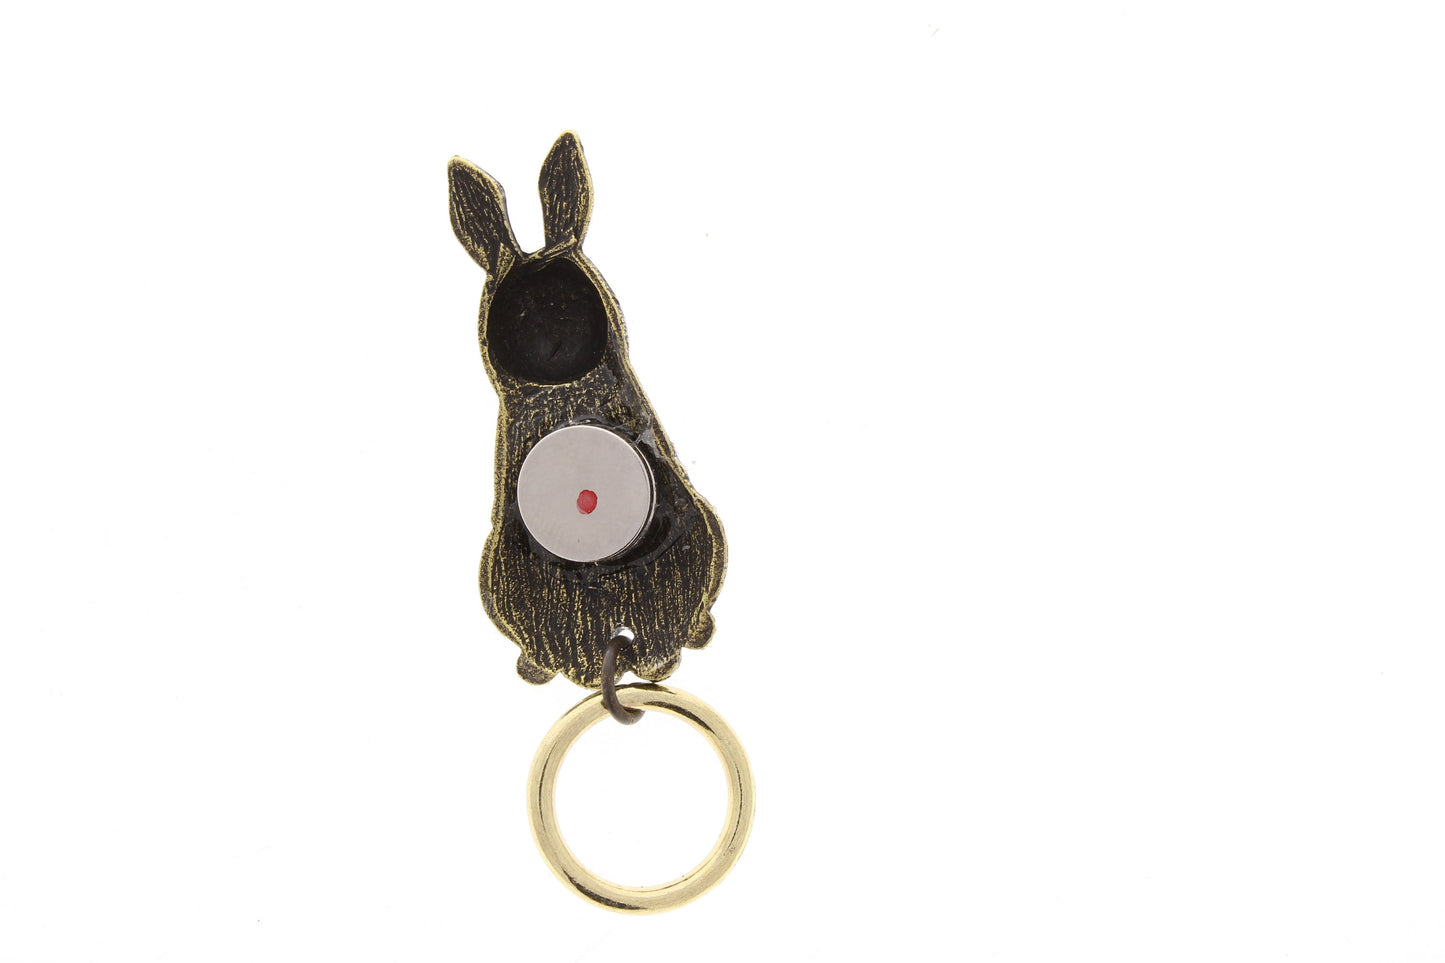 Rabbit readers eye glass or badge holder with magnetic clasp, Antique Gold or Antique Silver, Each